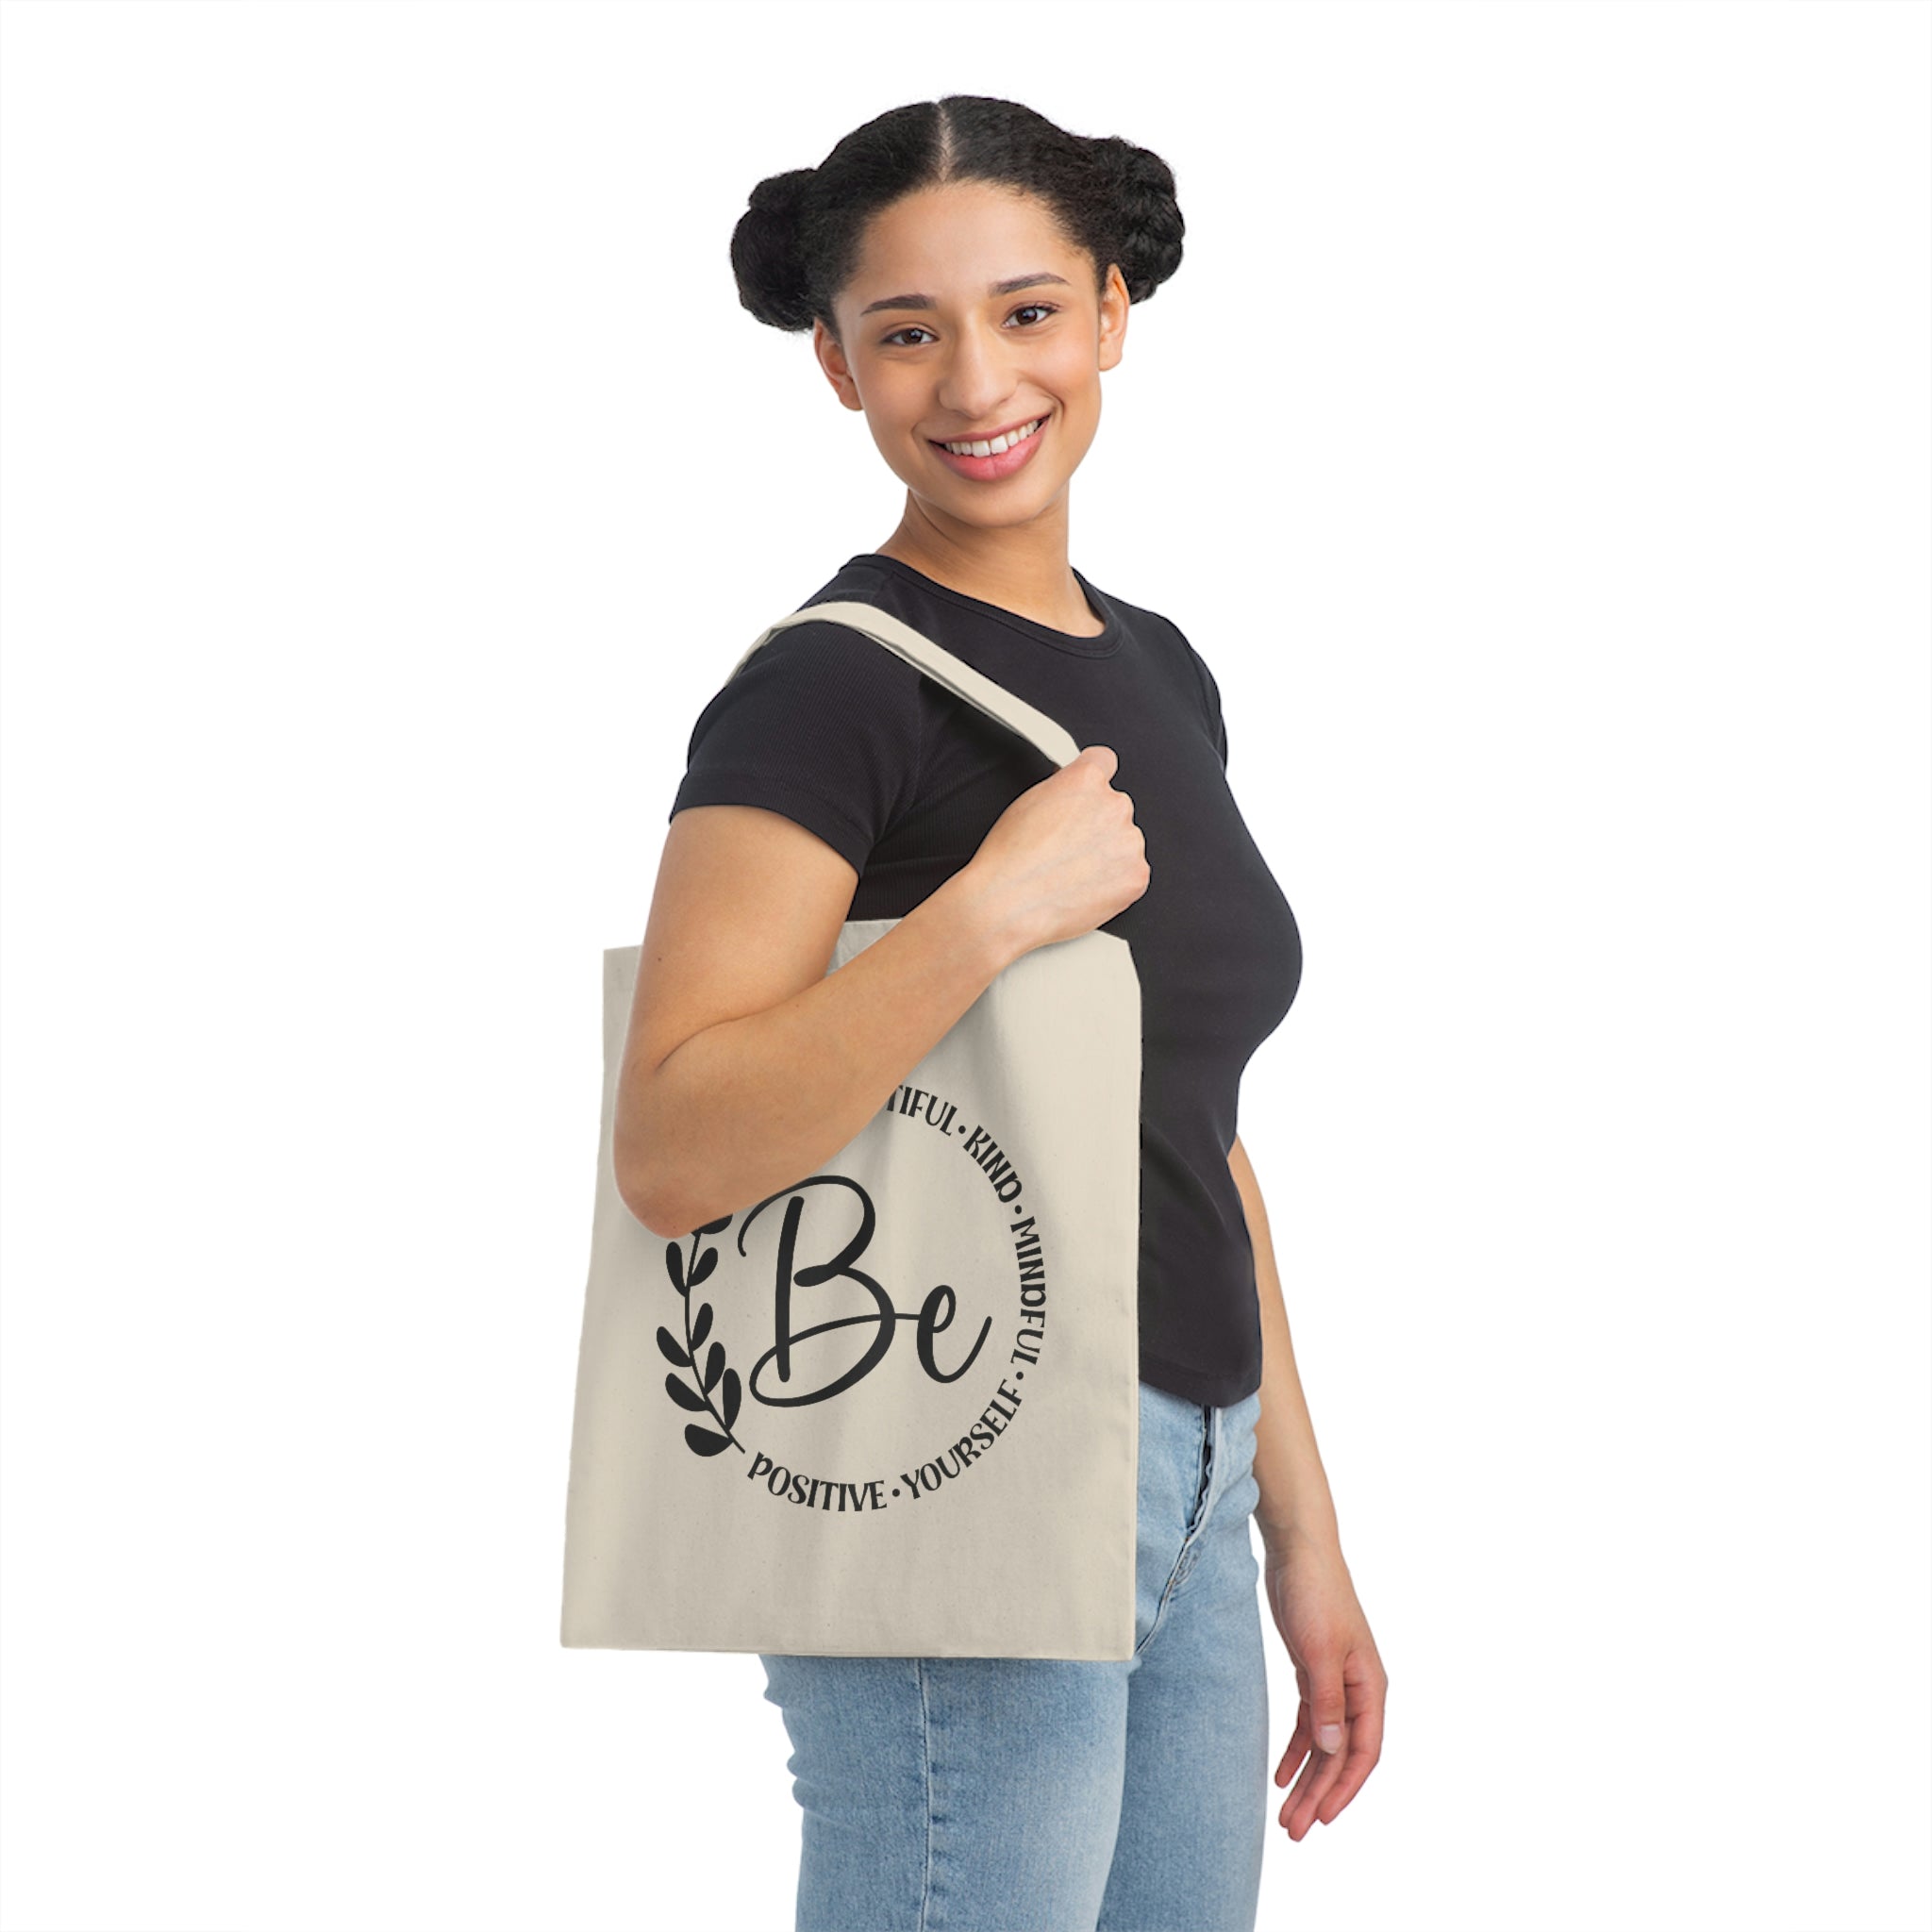 BE Beautiful, Kind, Mindful, Yourself, Positive Canvas Tote Bag  This stylish tote bag is perfect for anyone who wants to carry their message with style. The message on the front of the bag is a powerful reminder to be true to yourself and be kind to others.